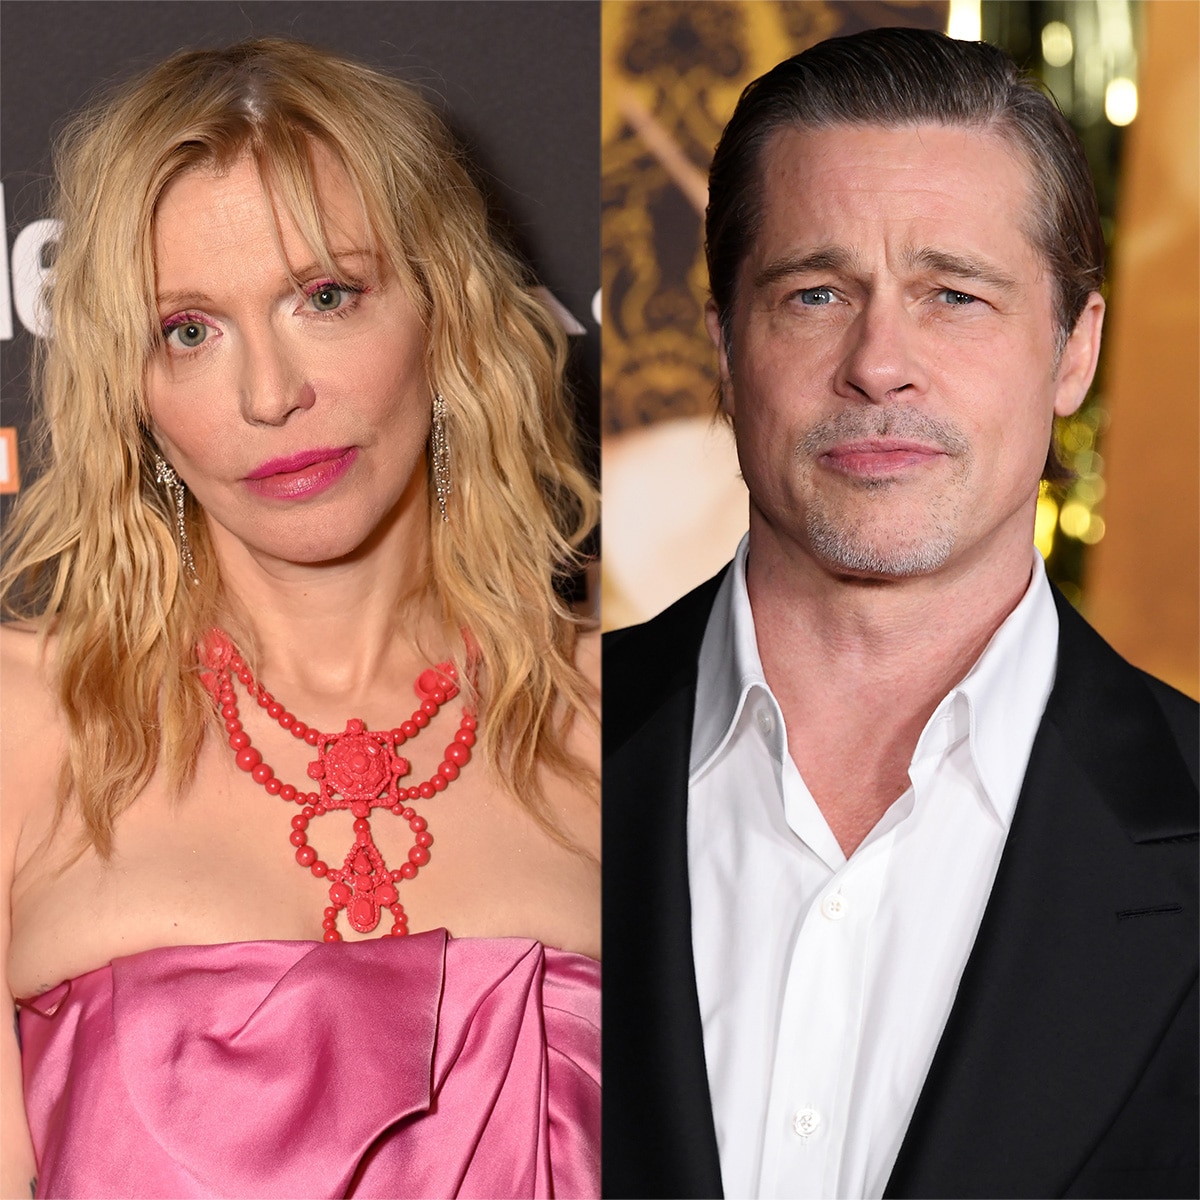 Courtney Love Claims Brad Pitt Got Her Fired From Fight Club